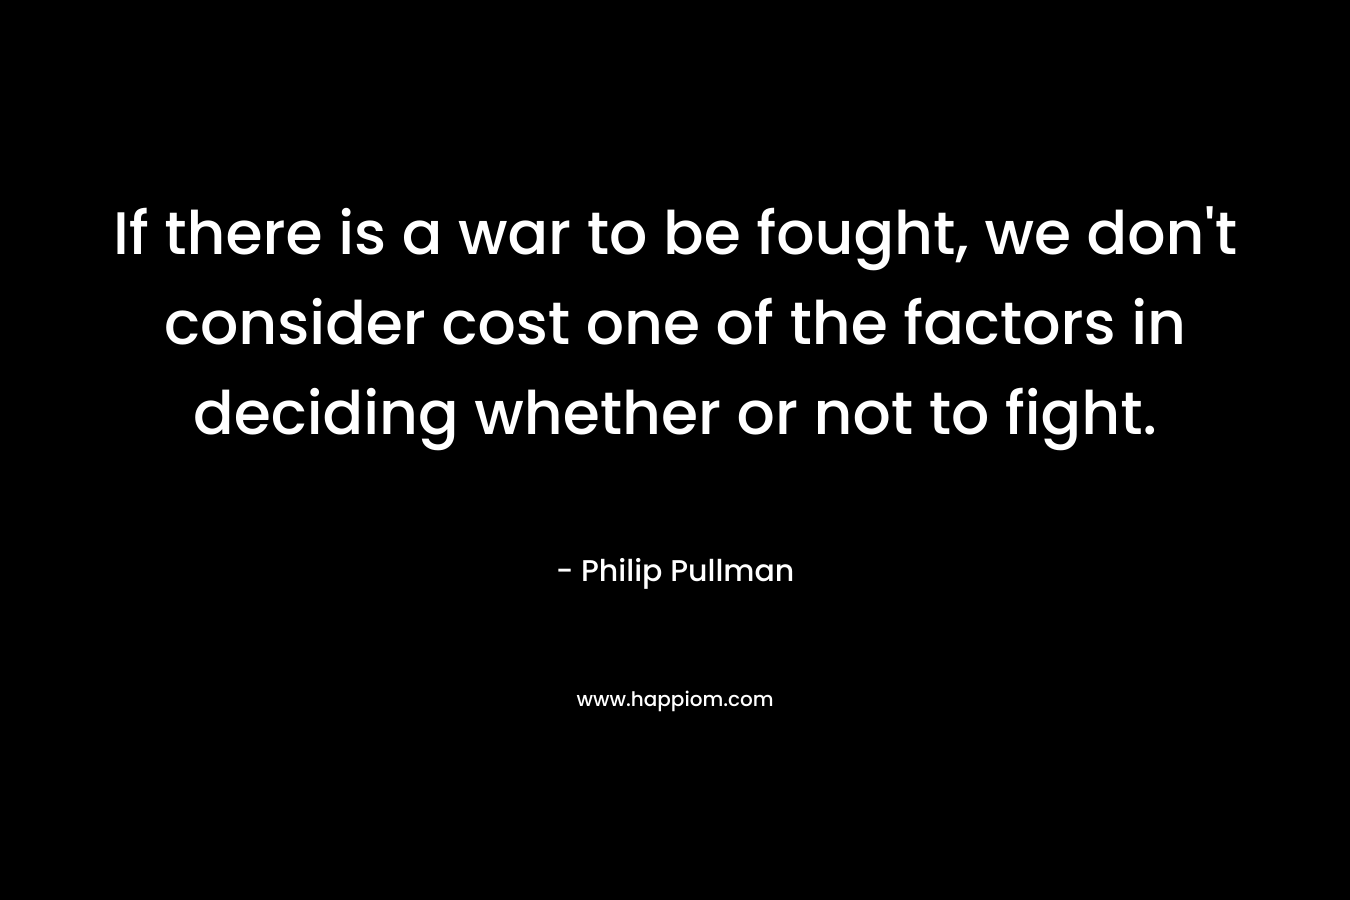 If there is a war to be fought, we don't consider cost one of the factors in deciding whether or not to fight.